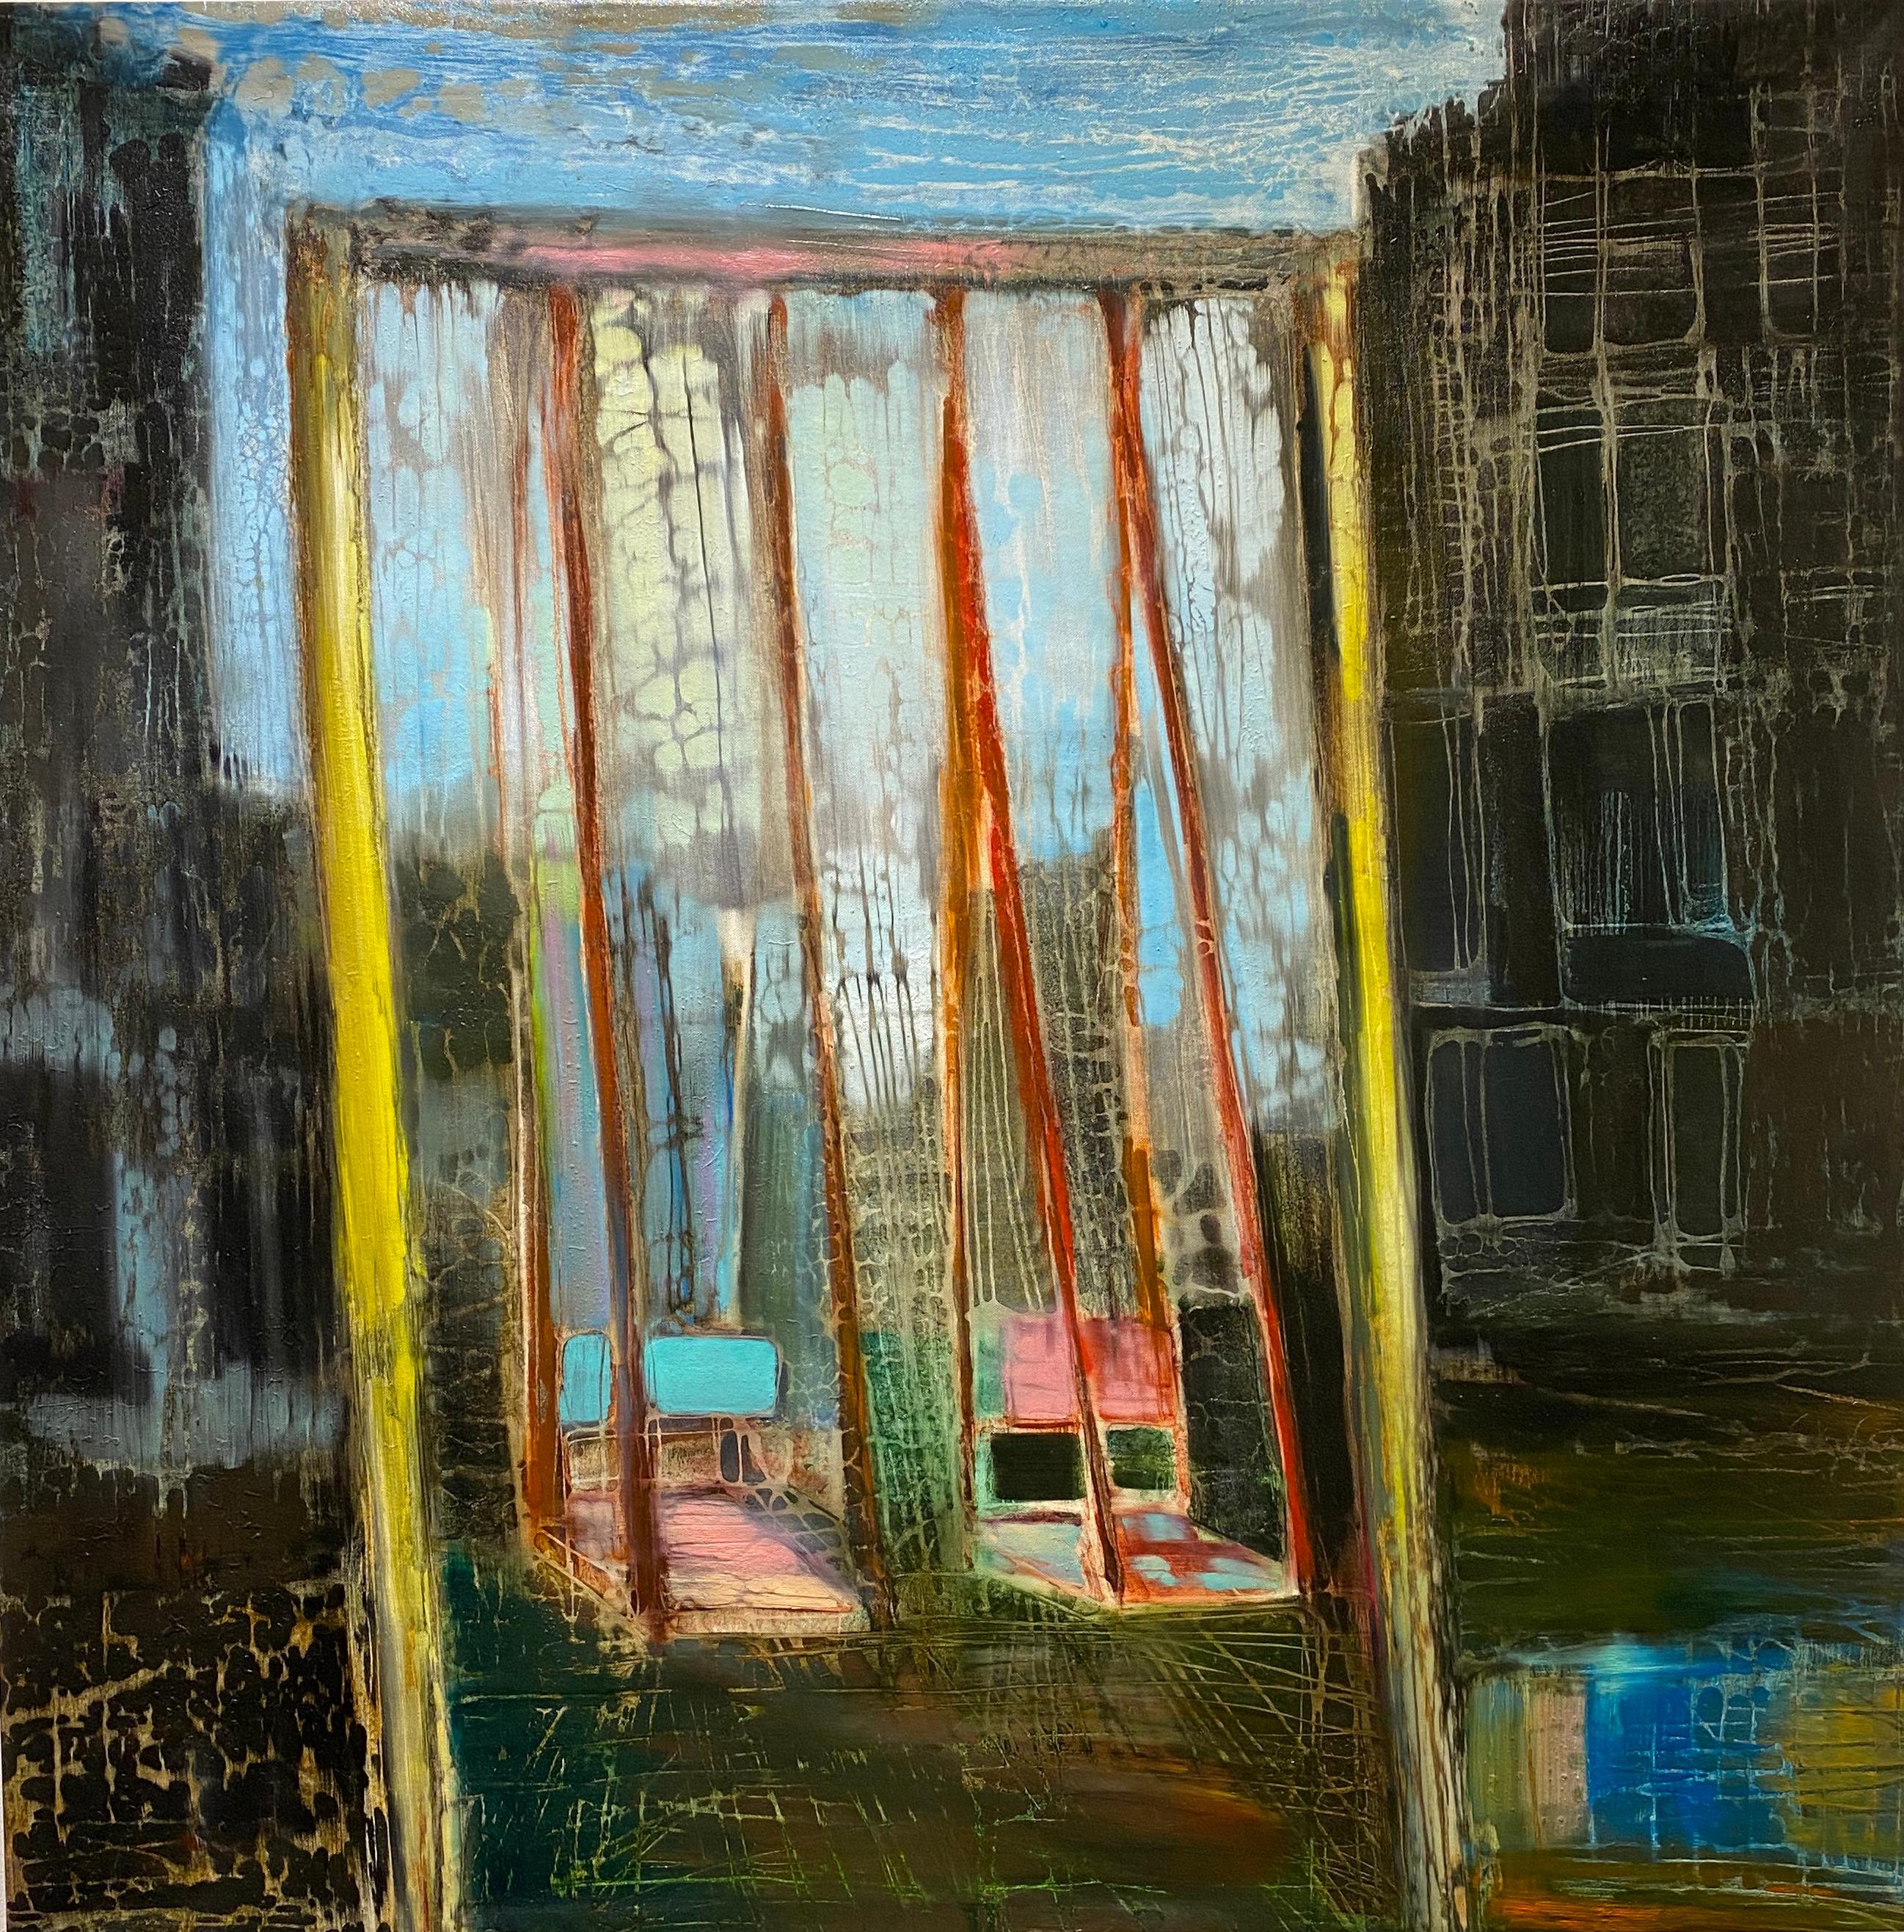 Oil on canvas

Teona Yamanidze is a Georgian artist born in 1988 who lives between New York, USA & Tbilisi, Georgia. Her works reflect on her personal experiences as an immigrant Georgian woman. Through creating abstract structural compositions in